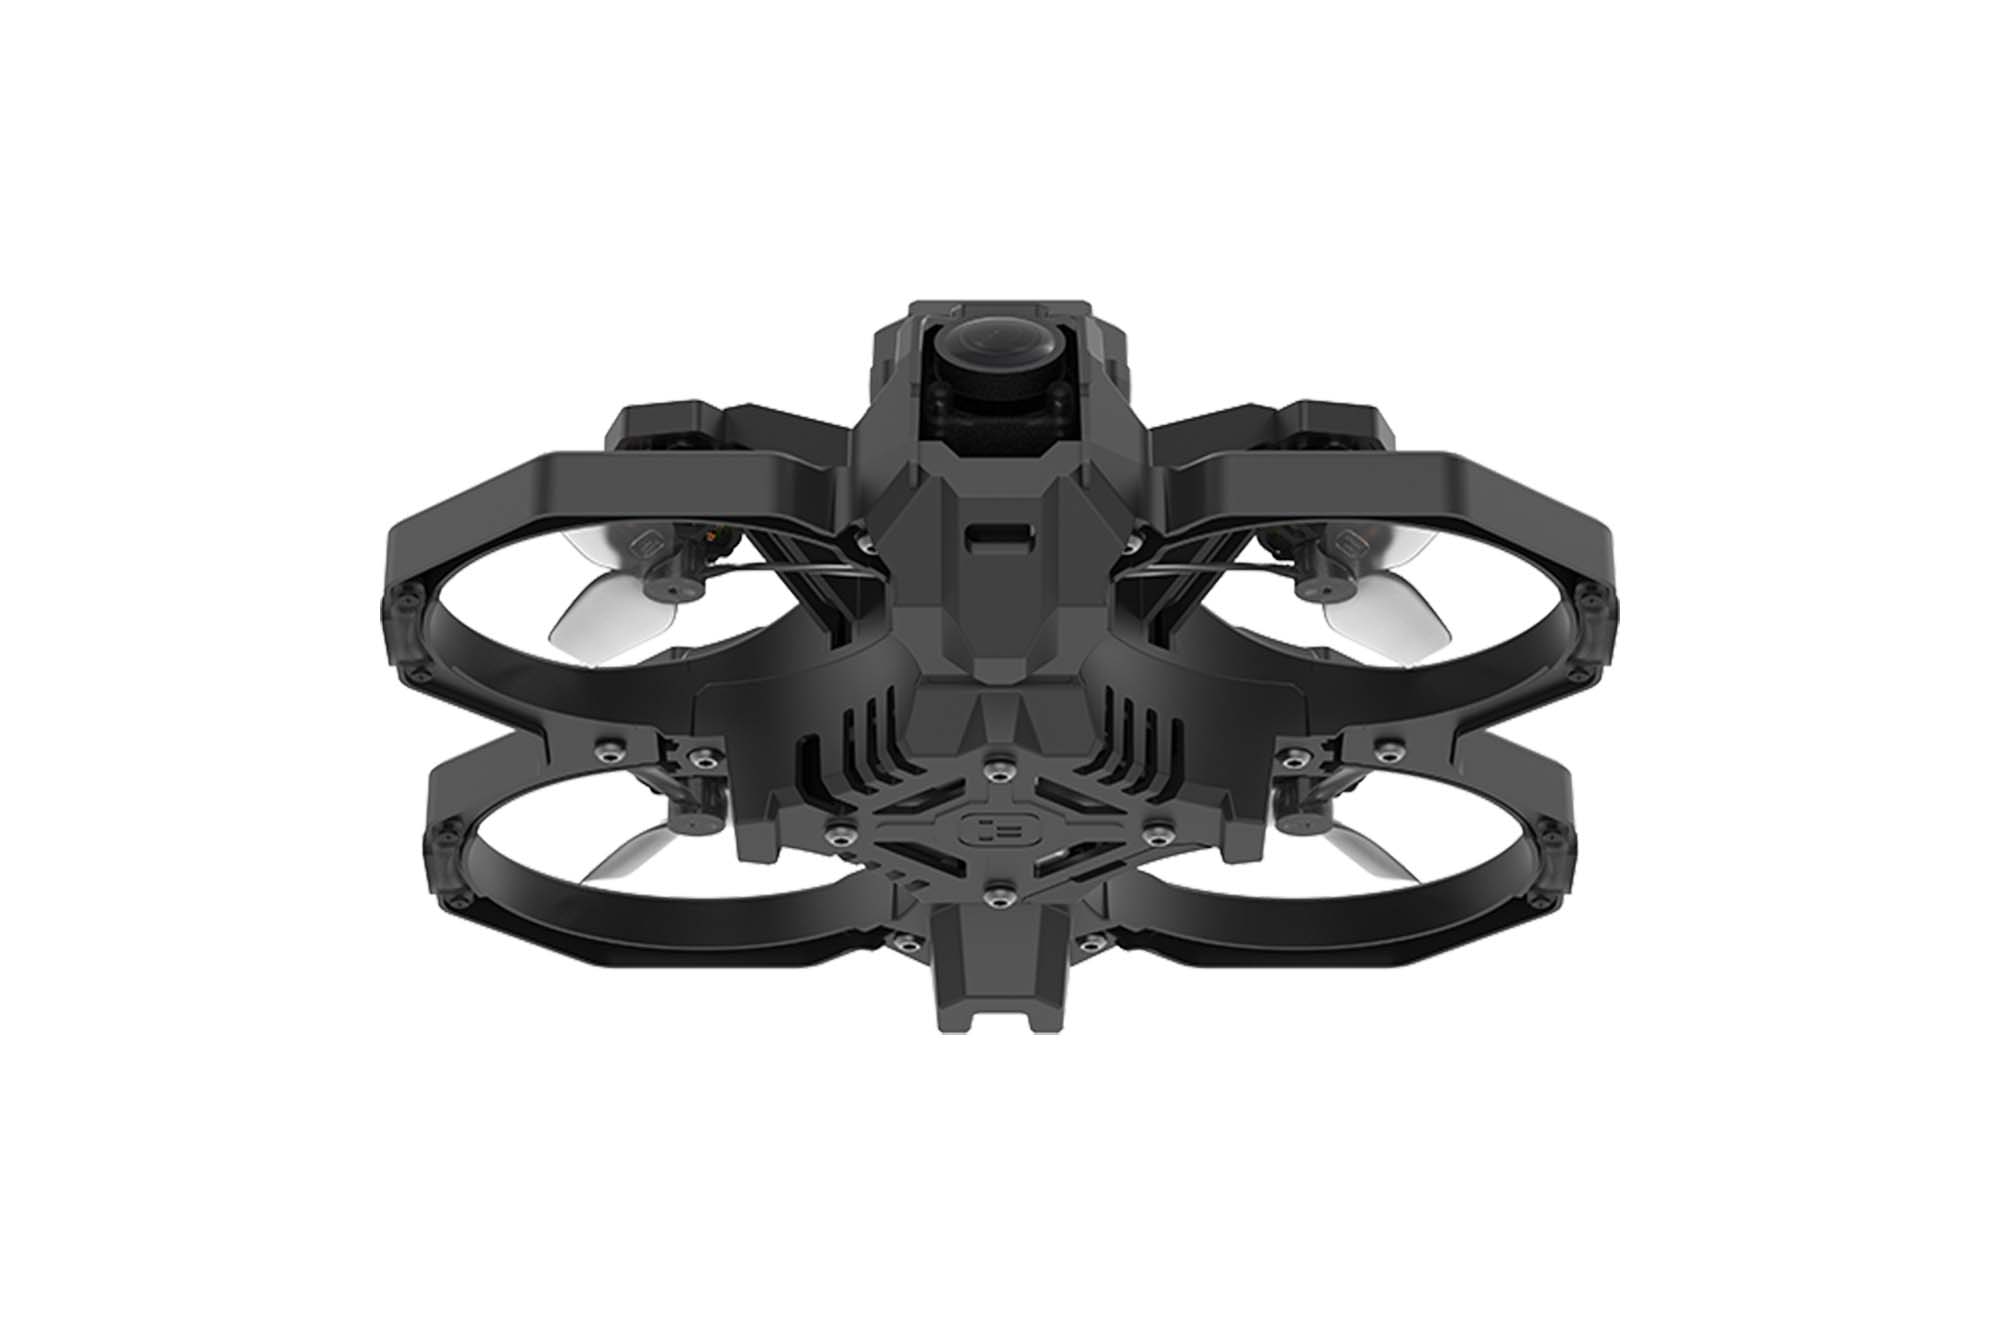 iFlight Defender 20 HD 3S FPV Freestyle Quadcopter